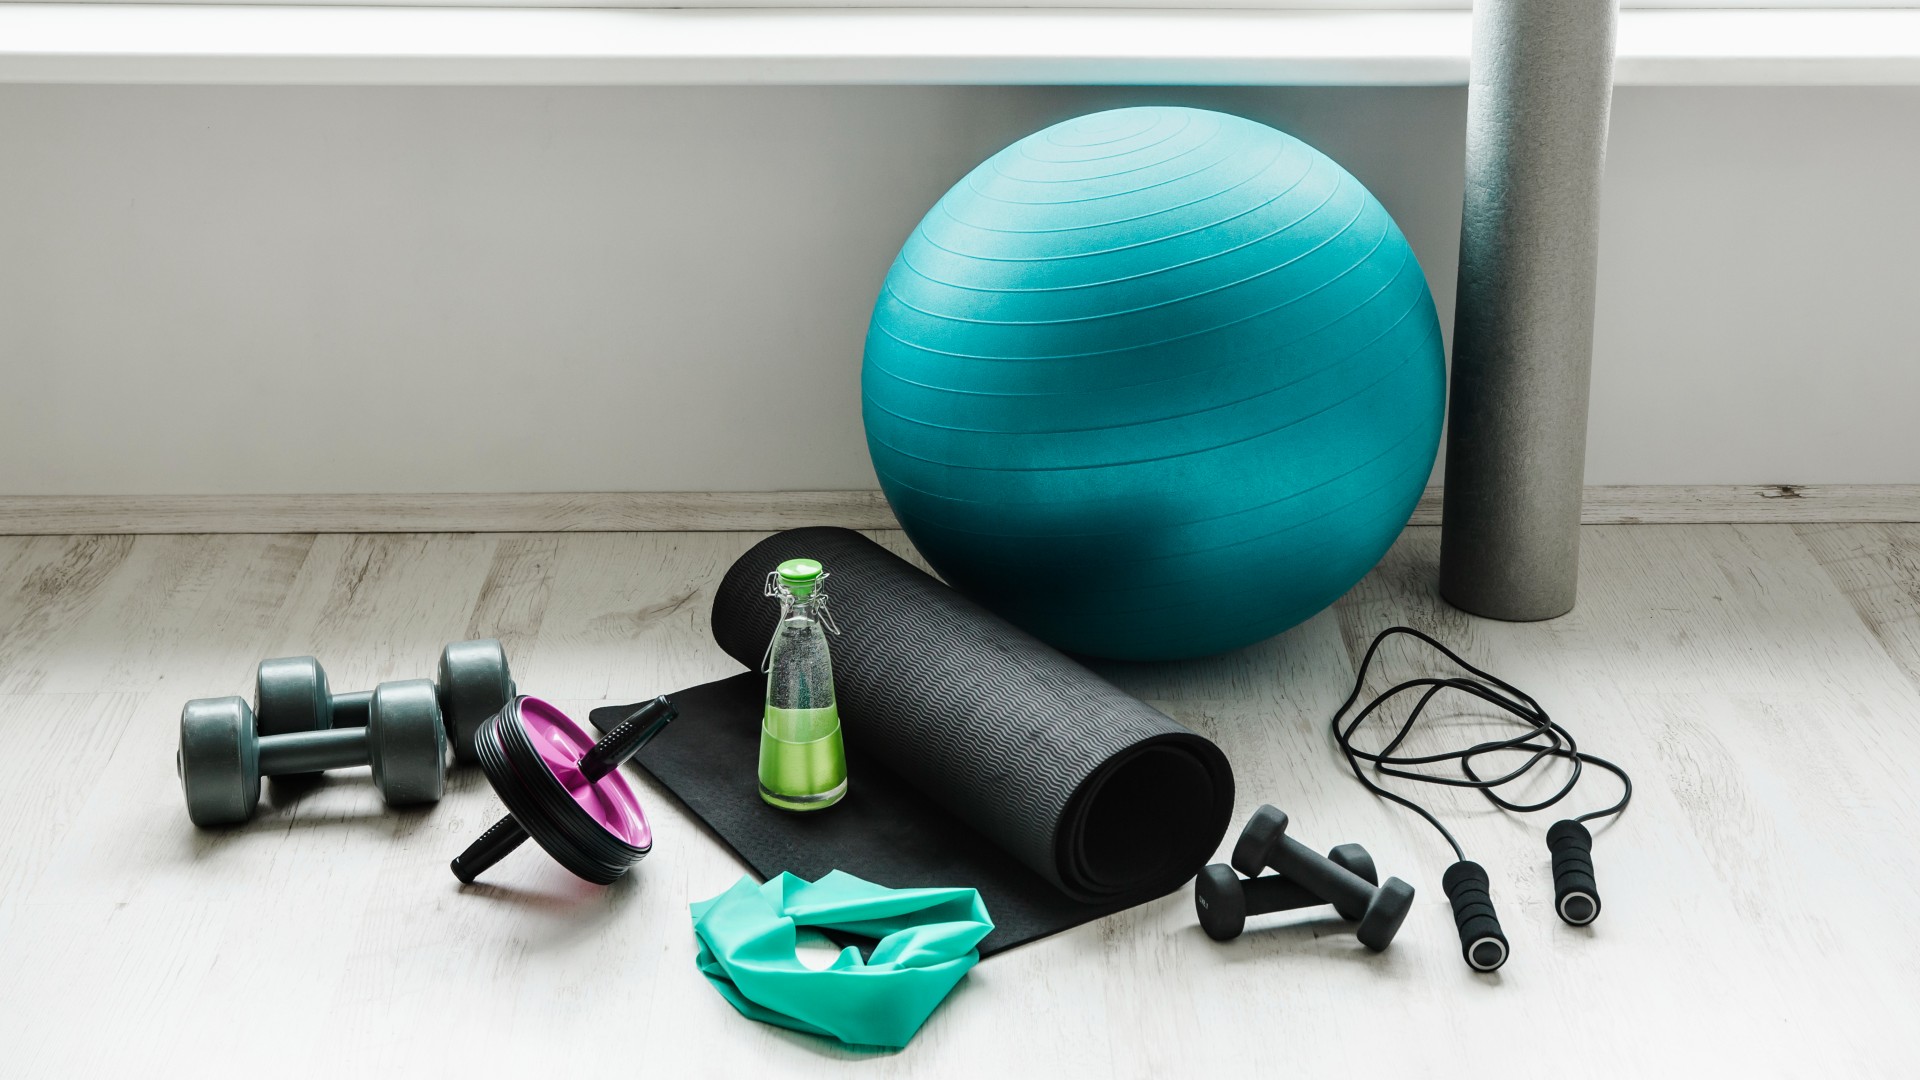 14 home fitness products recommended by a pro trainer - Reviewed